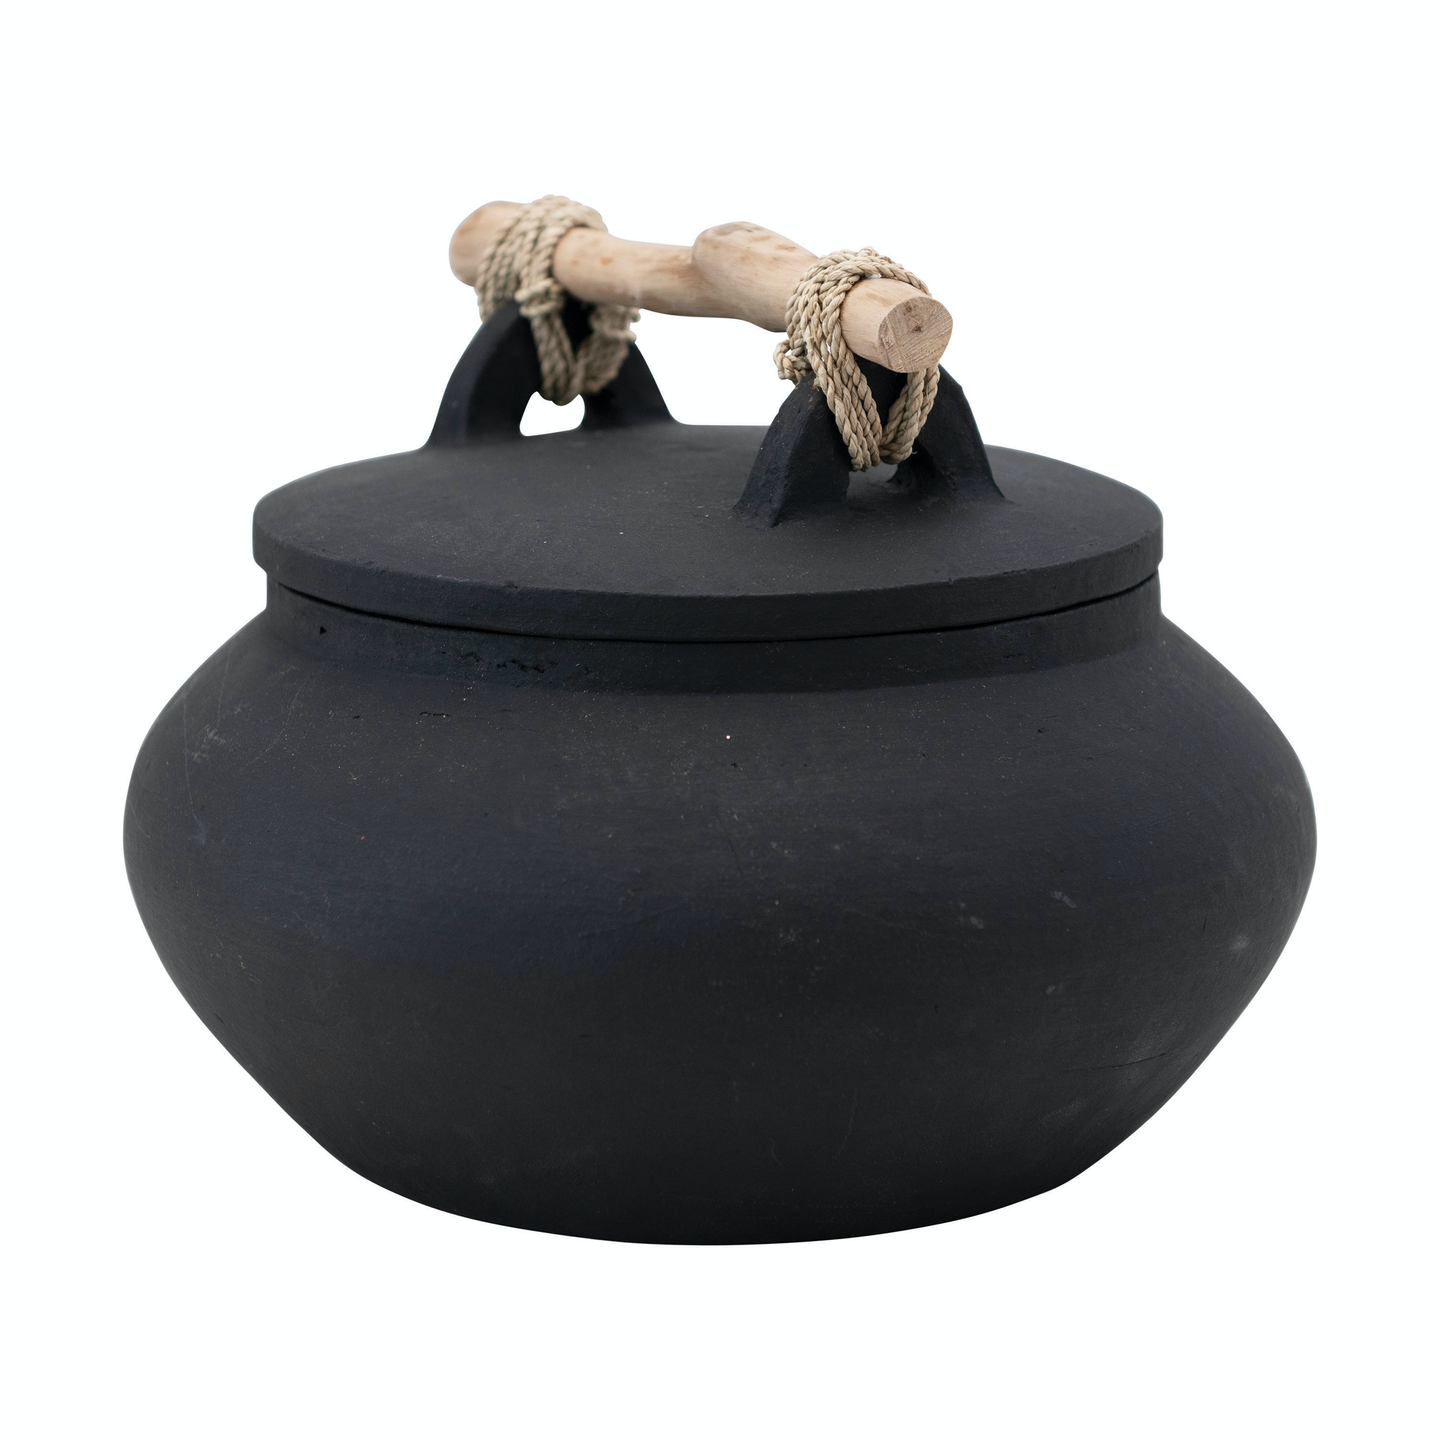 Decorative Terra-cotta Container with Lid and Driftwood Handle